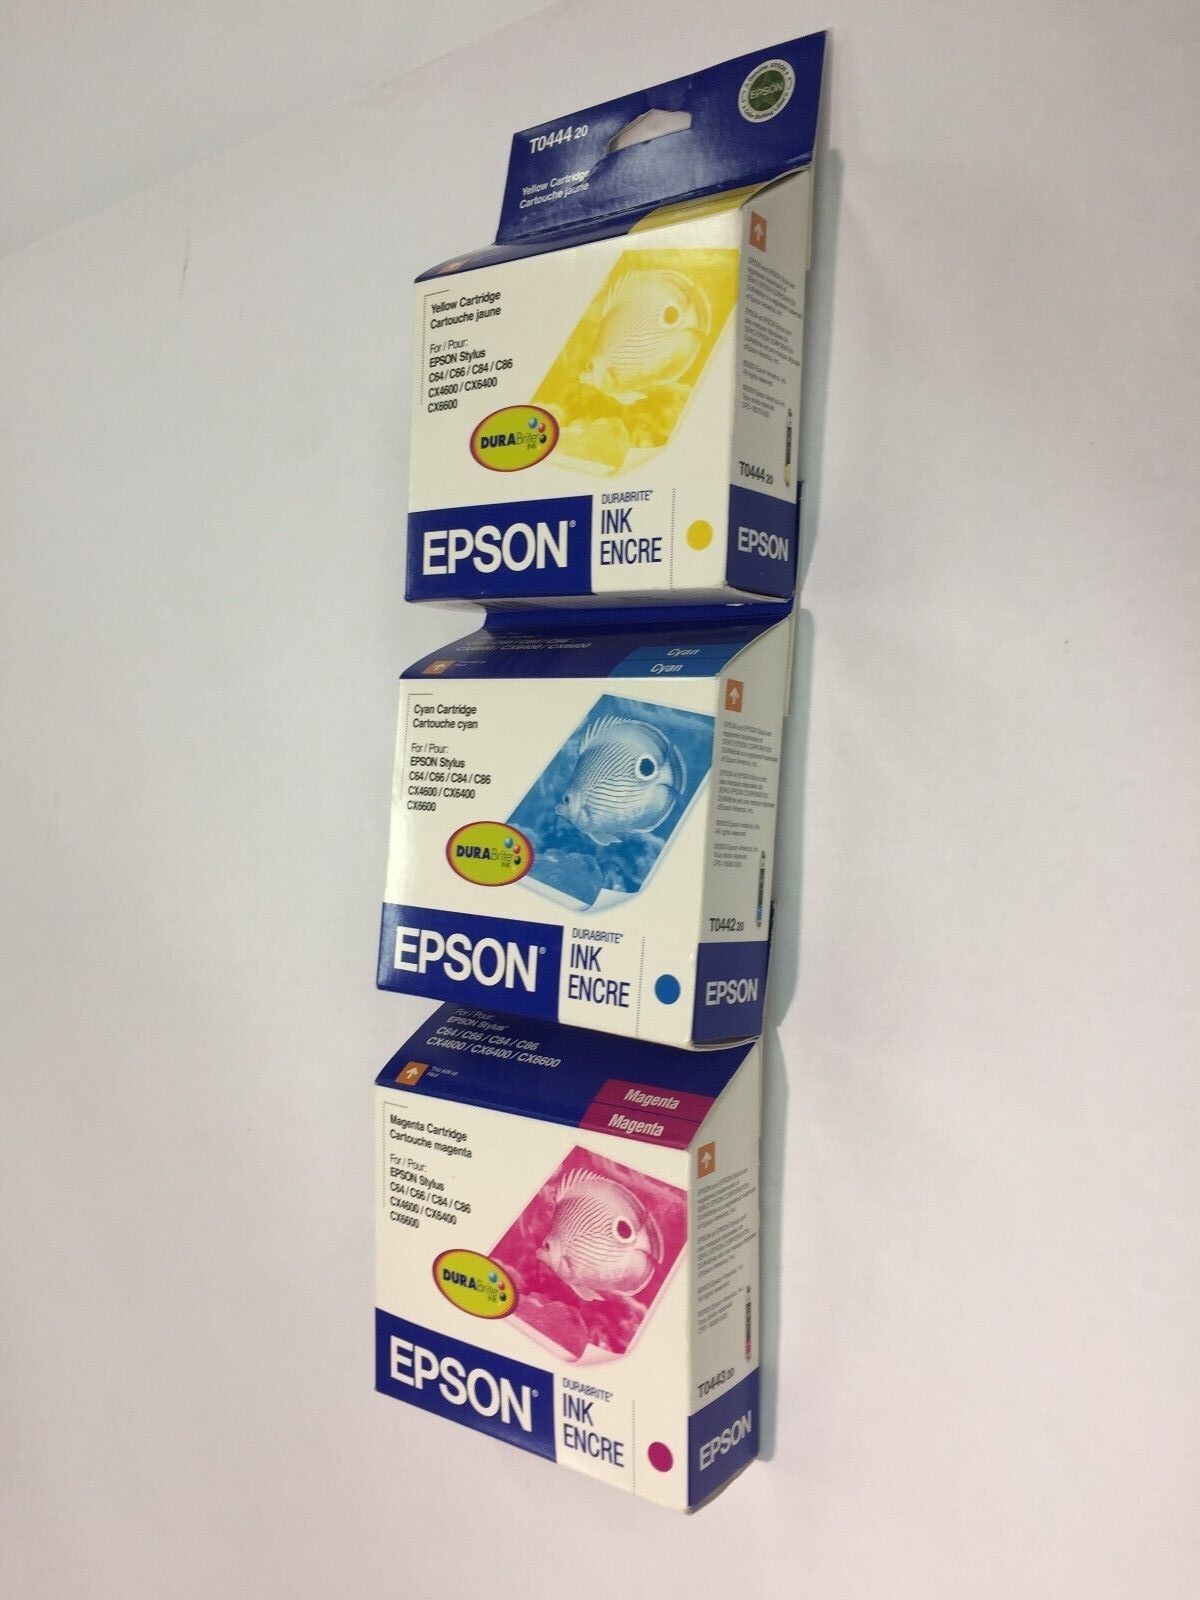 Epson T0442 Cyan, T0443 Magenta, T0444 Yellow (Lot of 3) NEW Factory Sealed